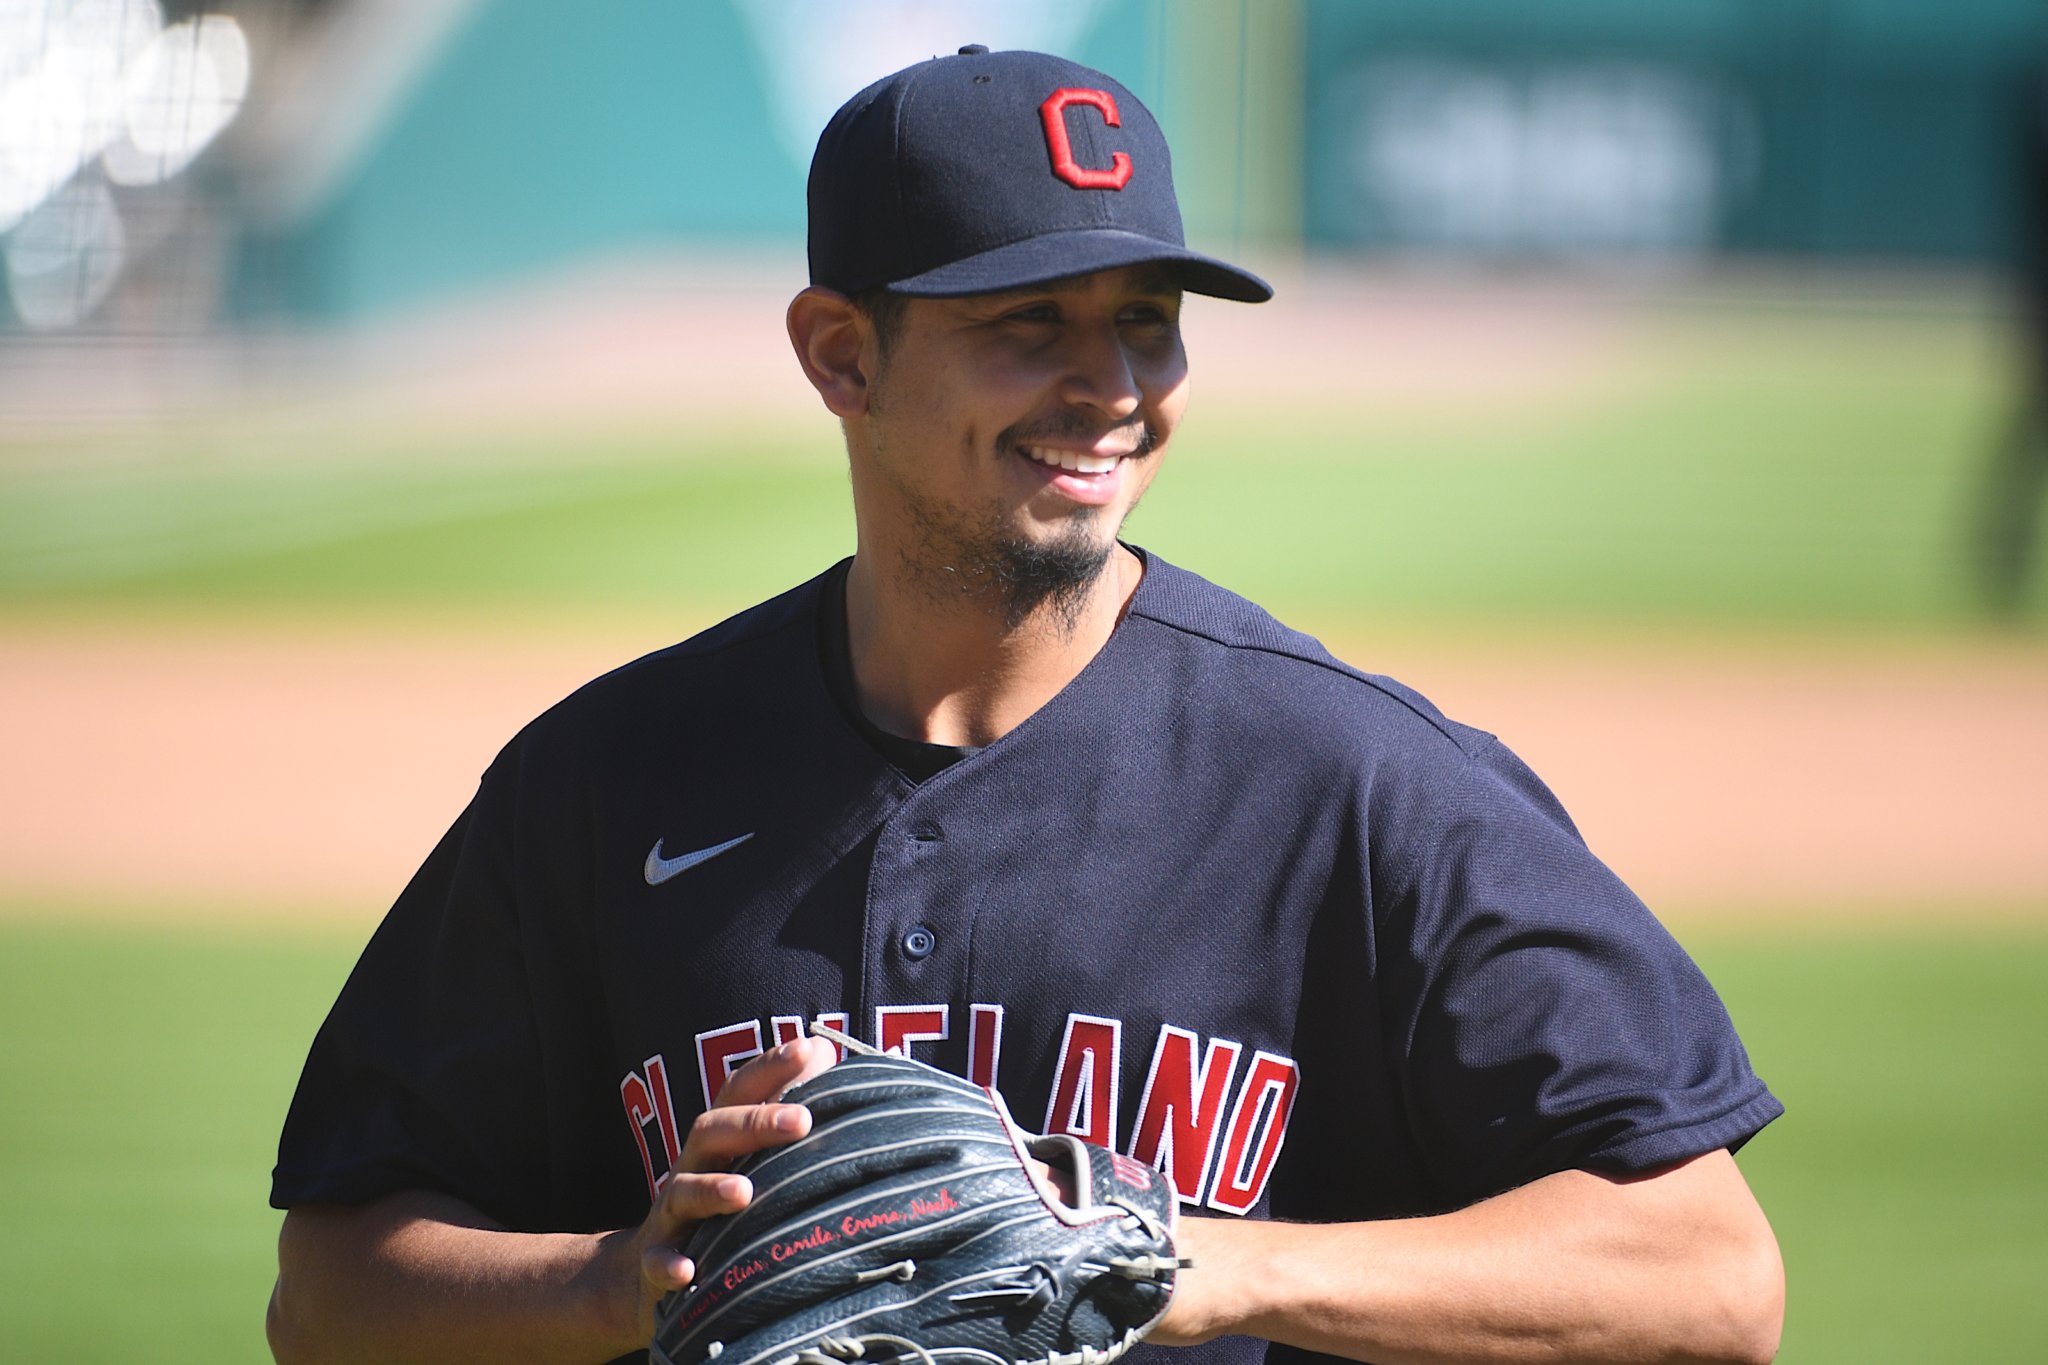 There is a 'big chance' Carlos Carrasco will make his Mets debut